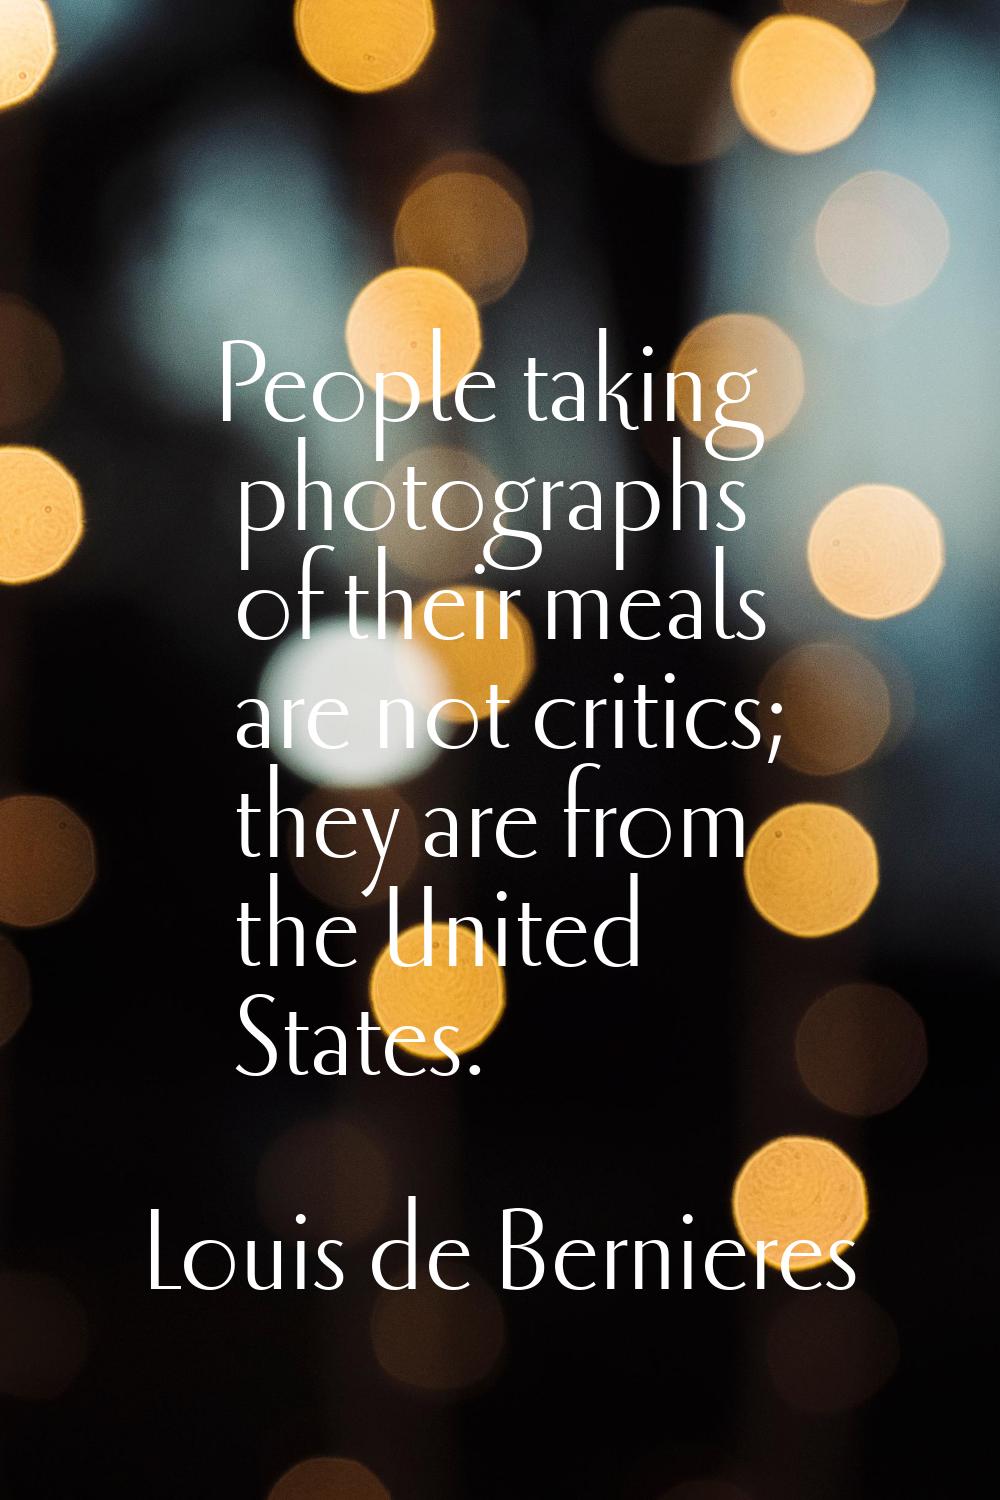 People taking photographs of their meals are not critics; they are from the United States.